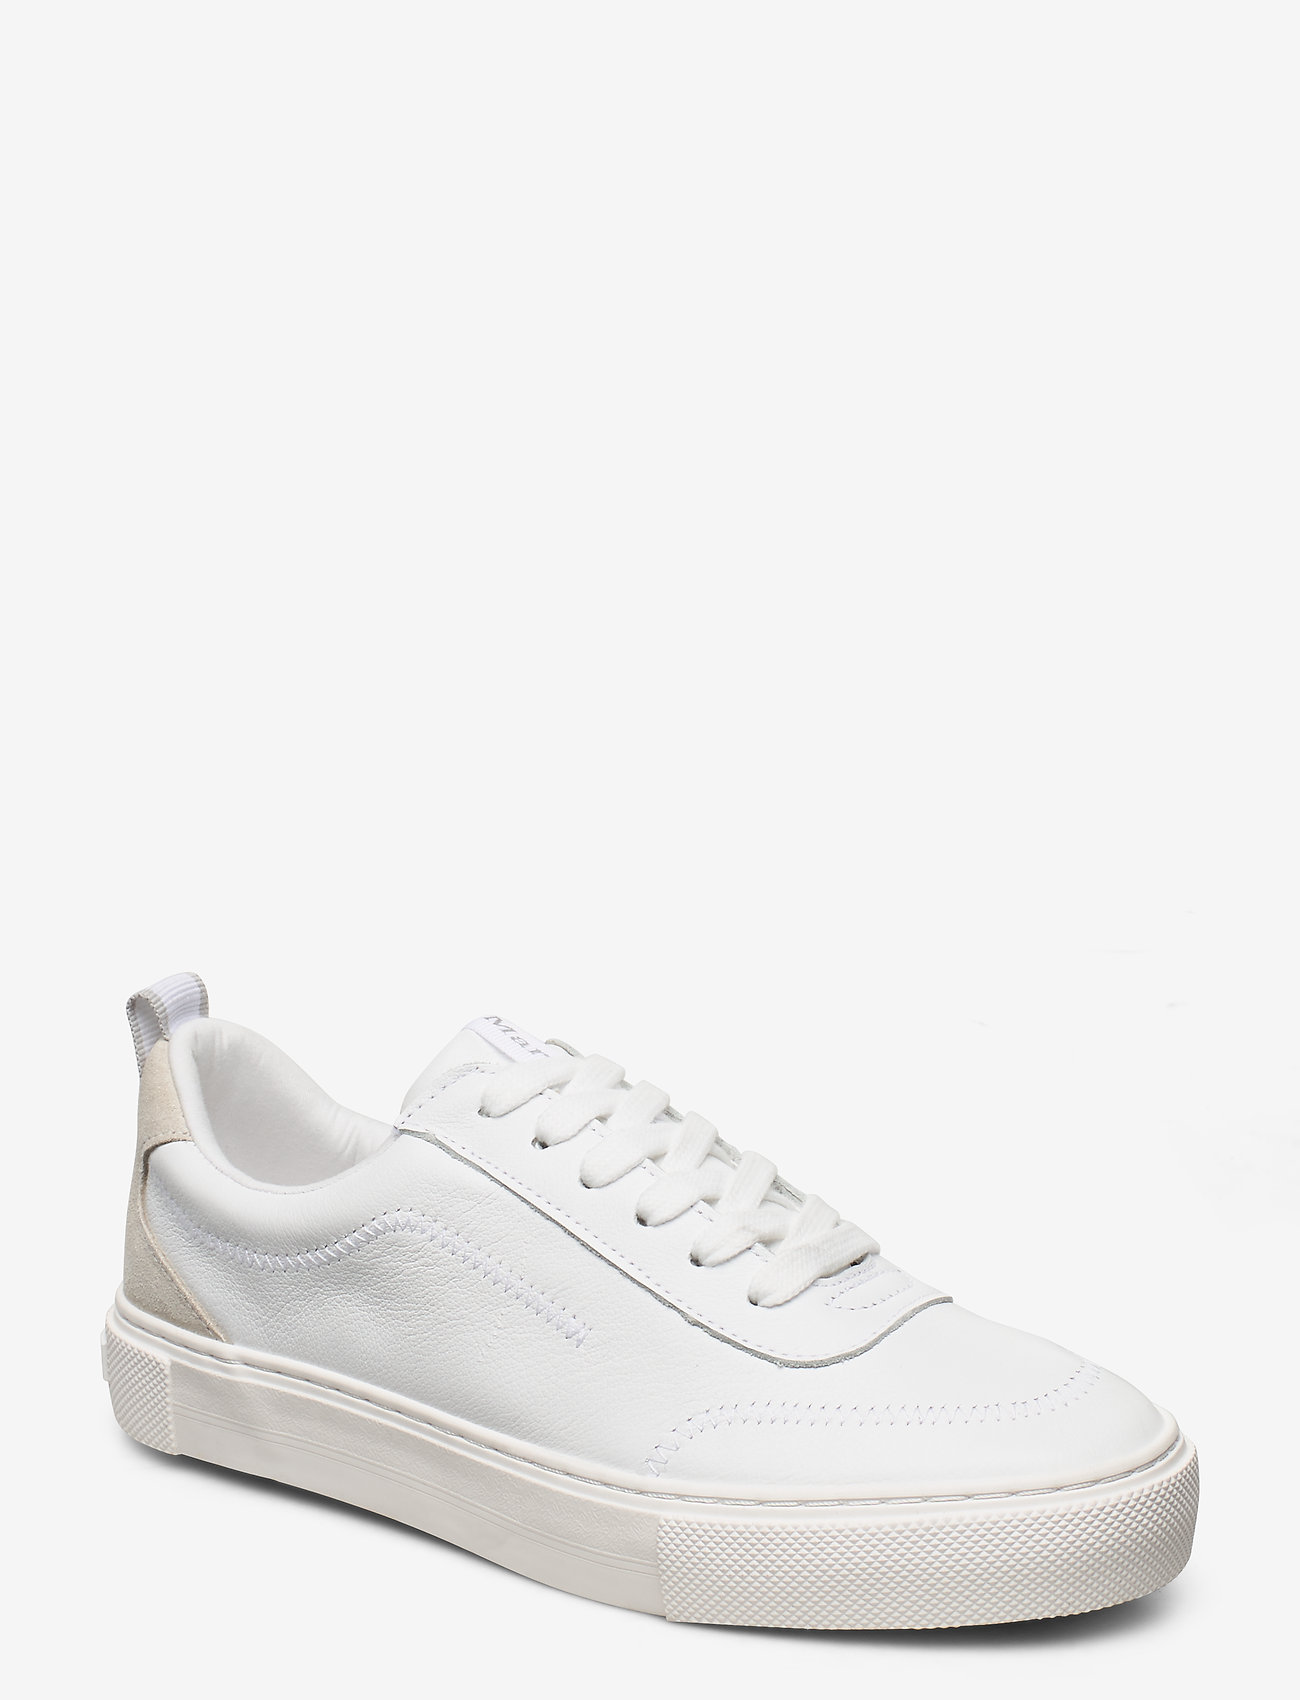 off white 3. polo sneakers